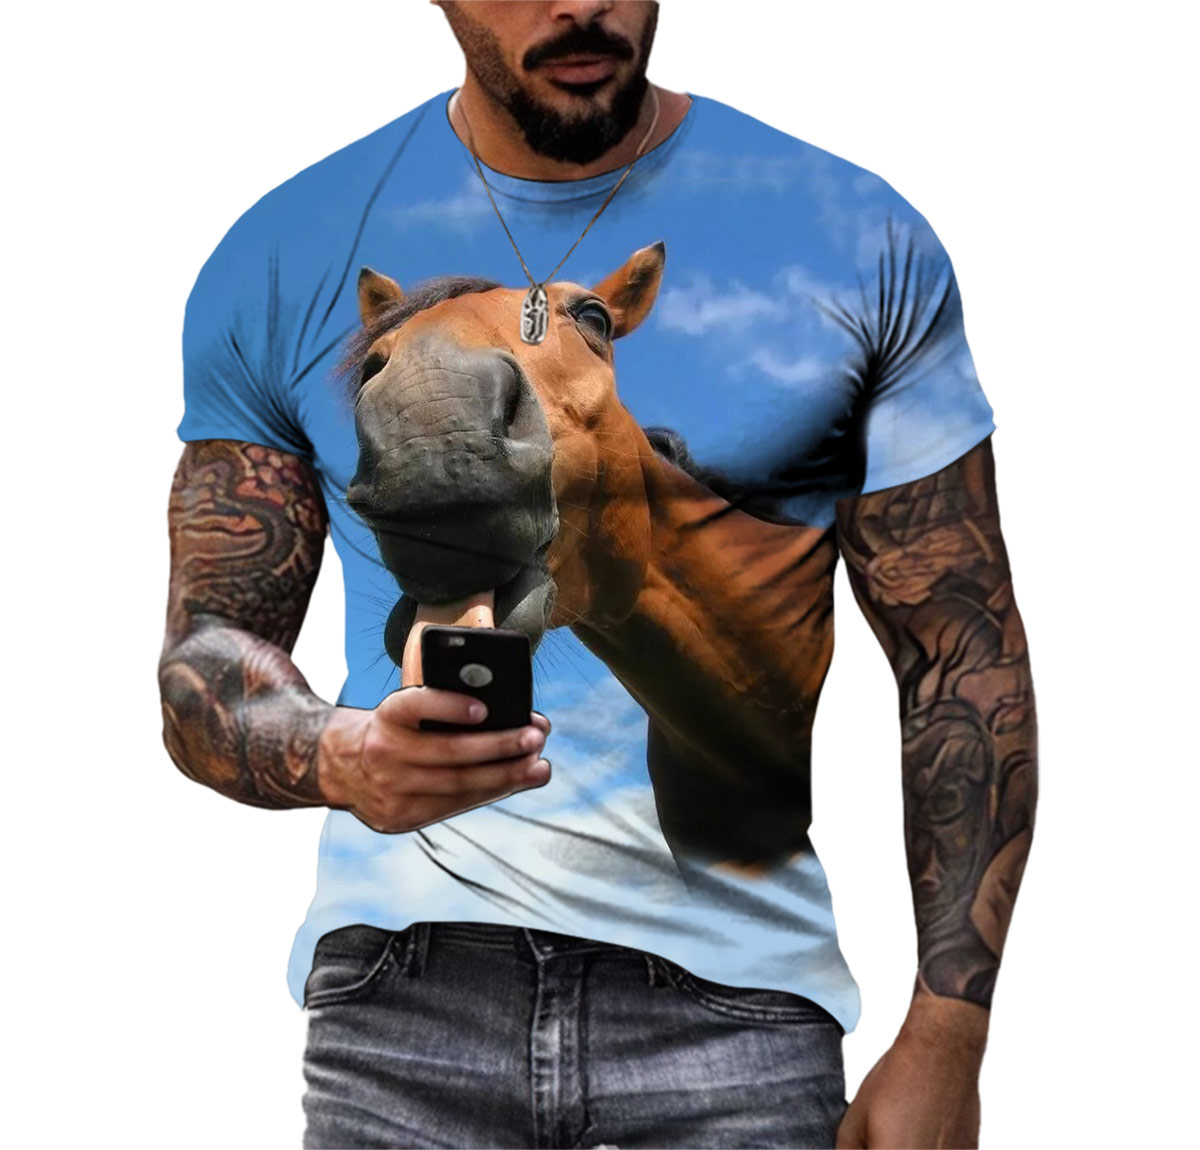 New Personality Funny Horse Summer Men's Hd 3d Printed T-shirt Crew Neck Short Sleeve Wide Comfortable Quick Drying Top Clothing